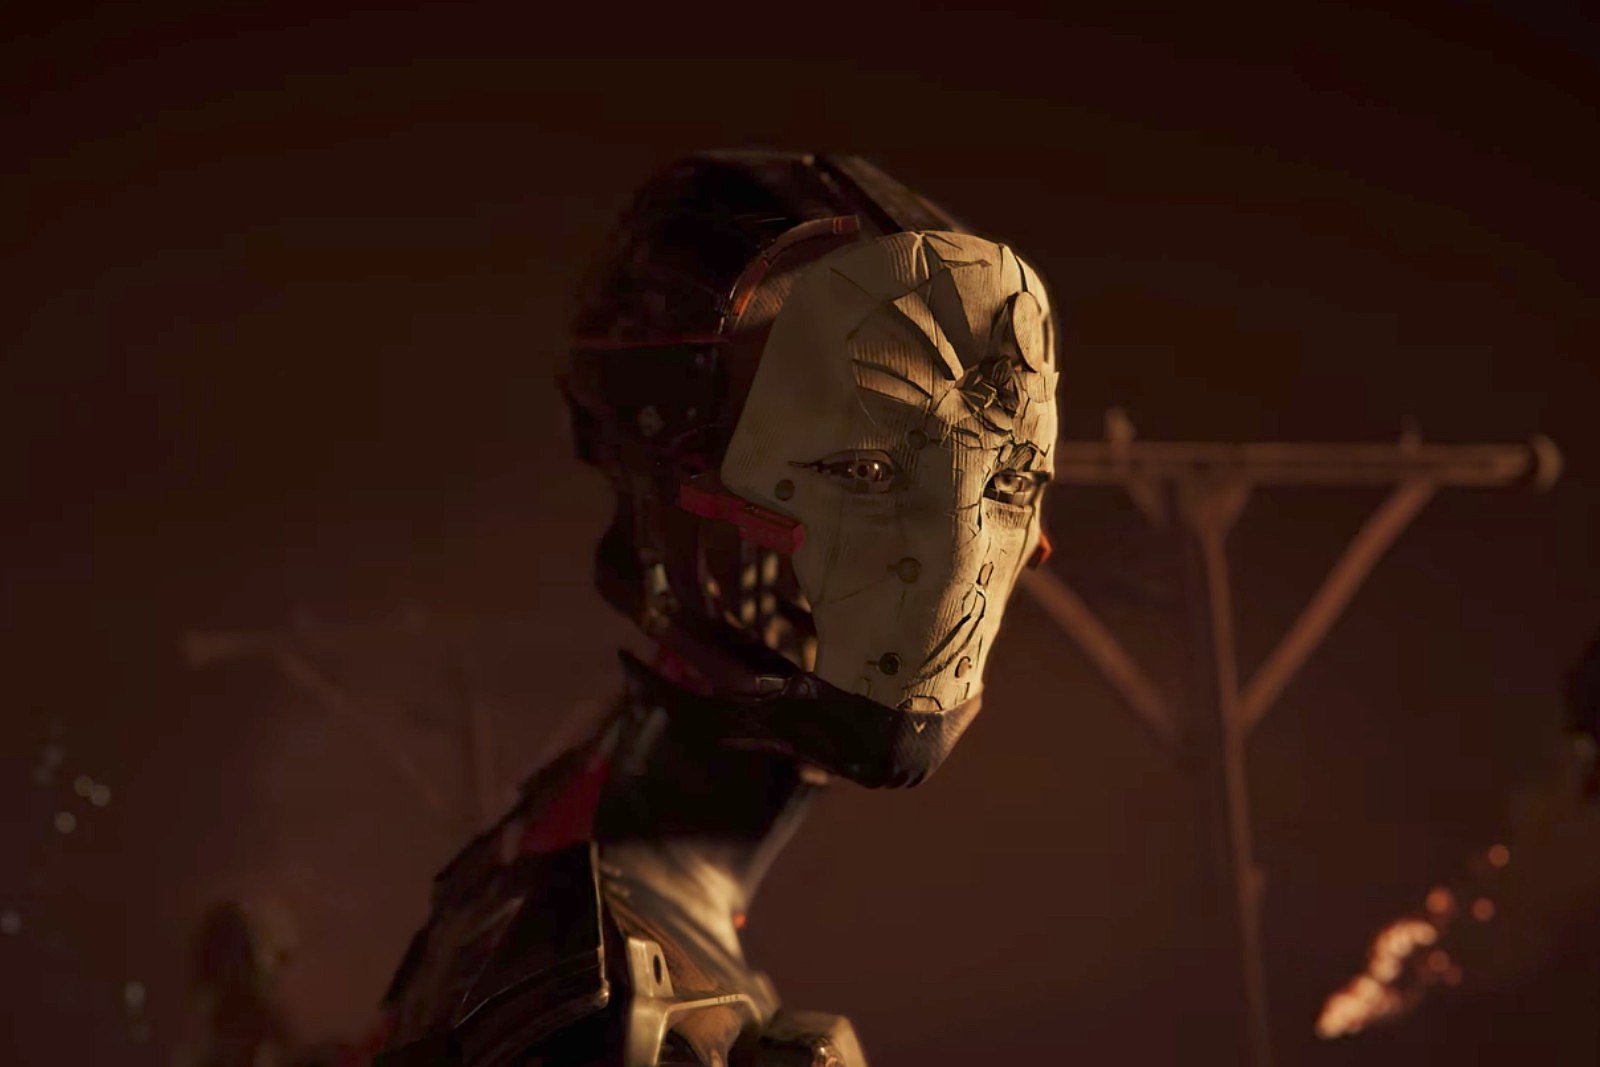 Watch Neill Blomkamp's New Short, Made With Cutting-Edge Gaming Technology